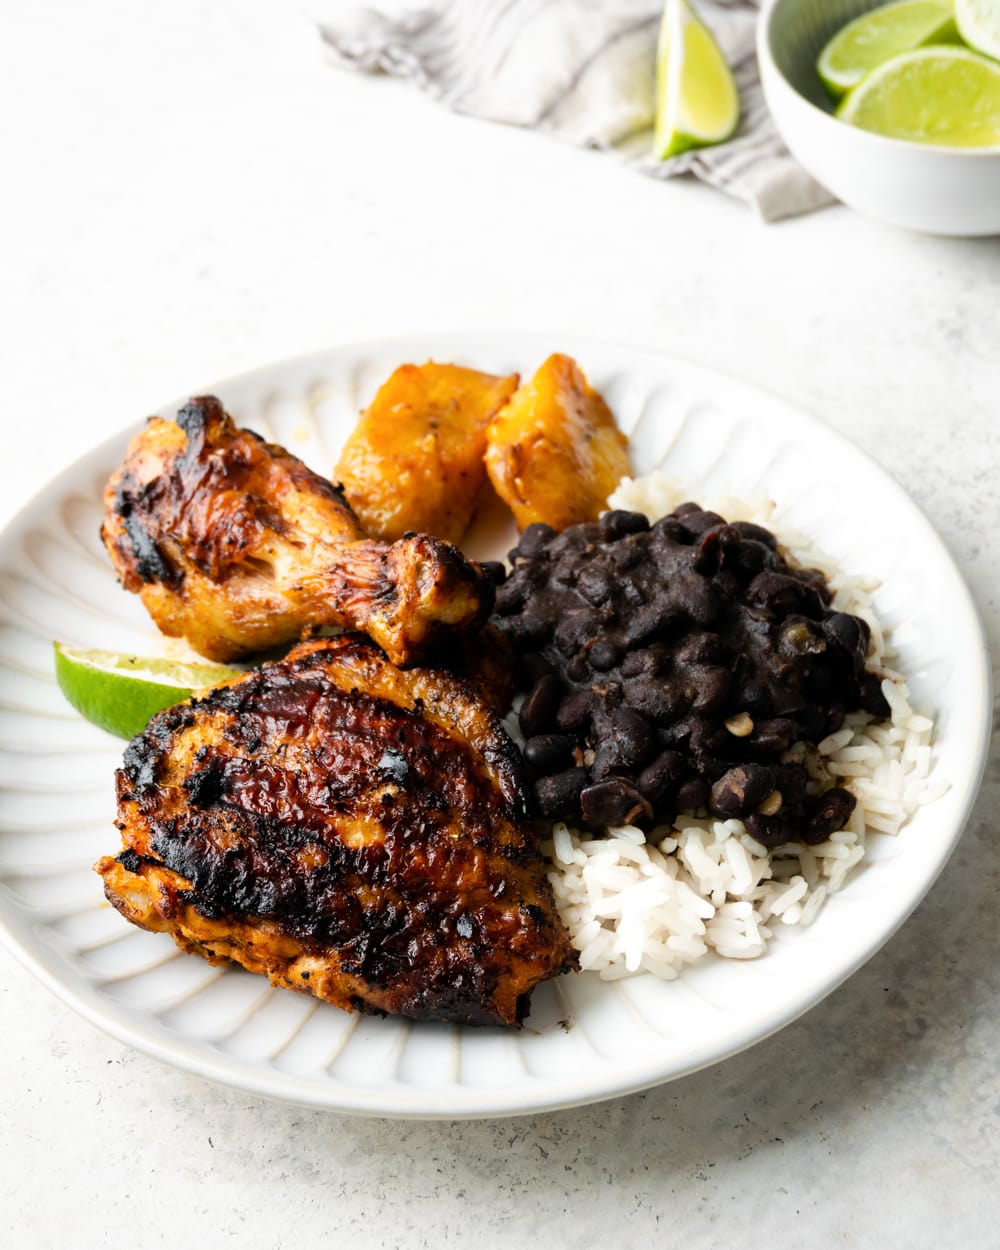 Cuban grilled chicken thighs with sweet plantains, rice and black beans on a white plate